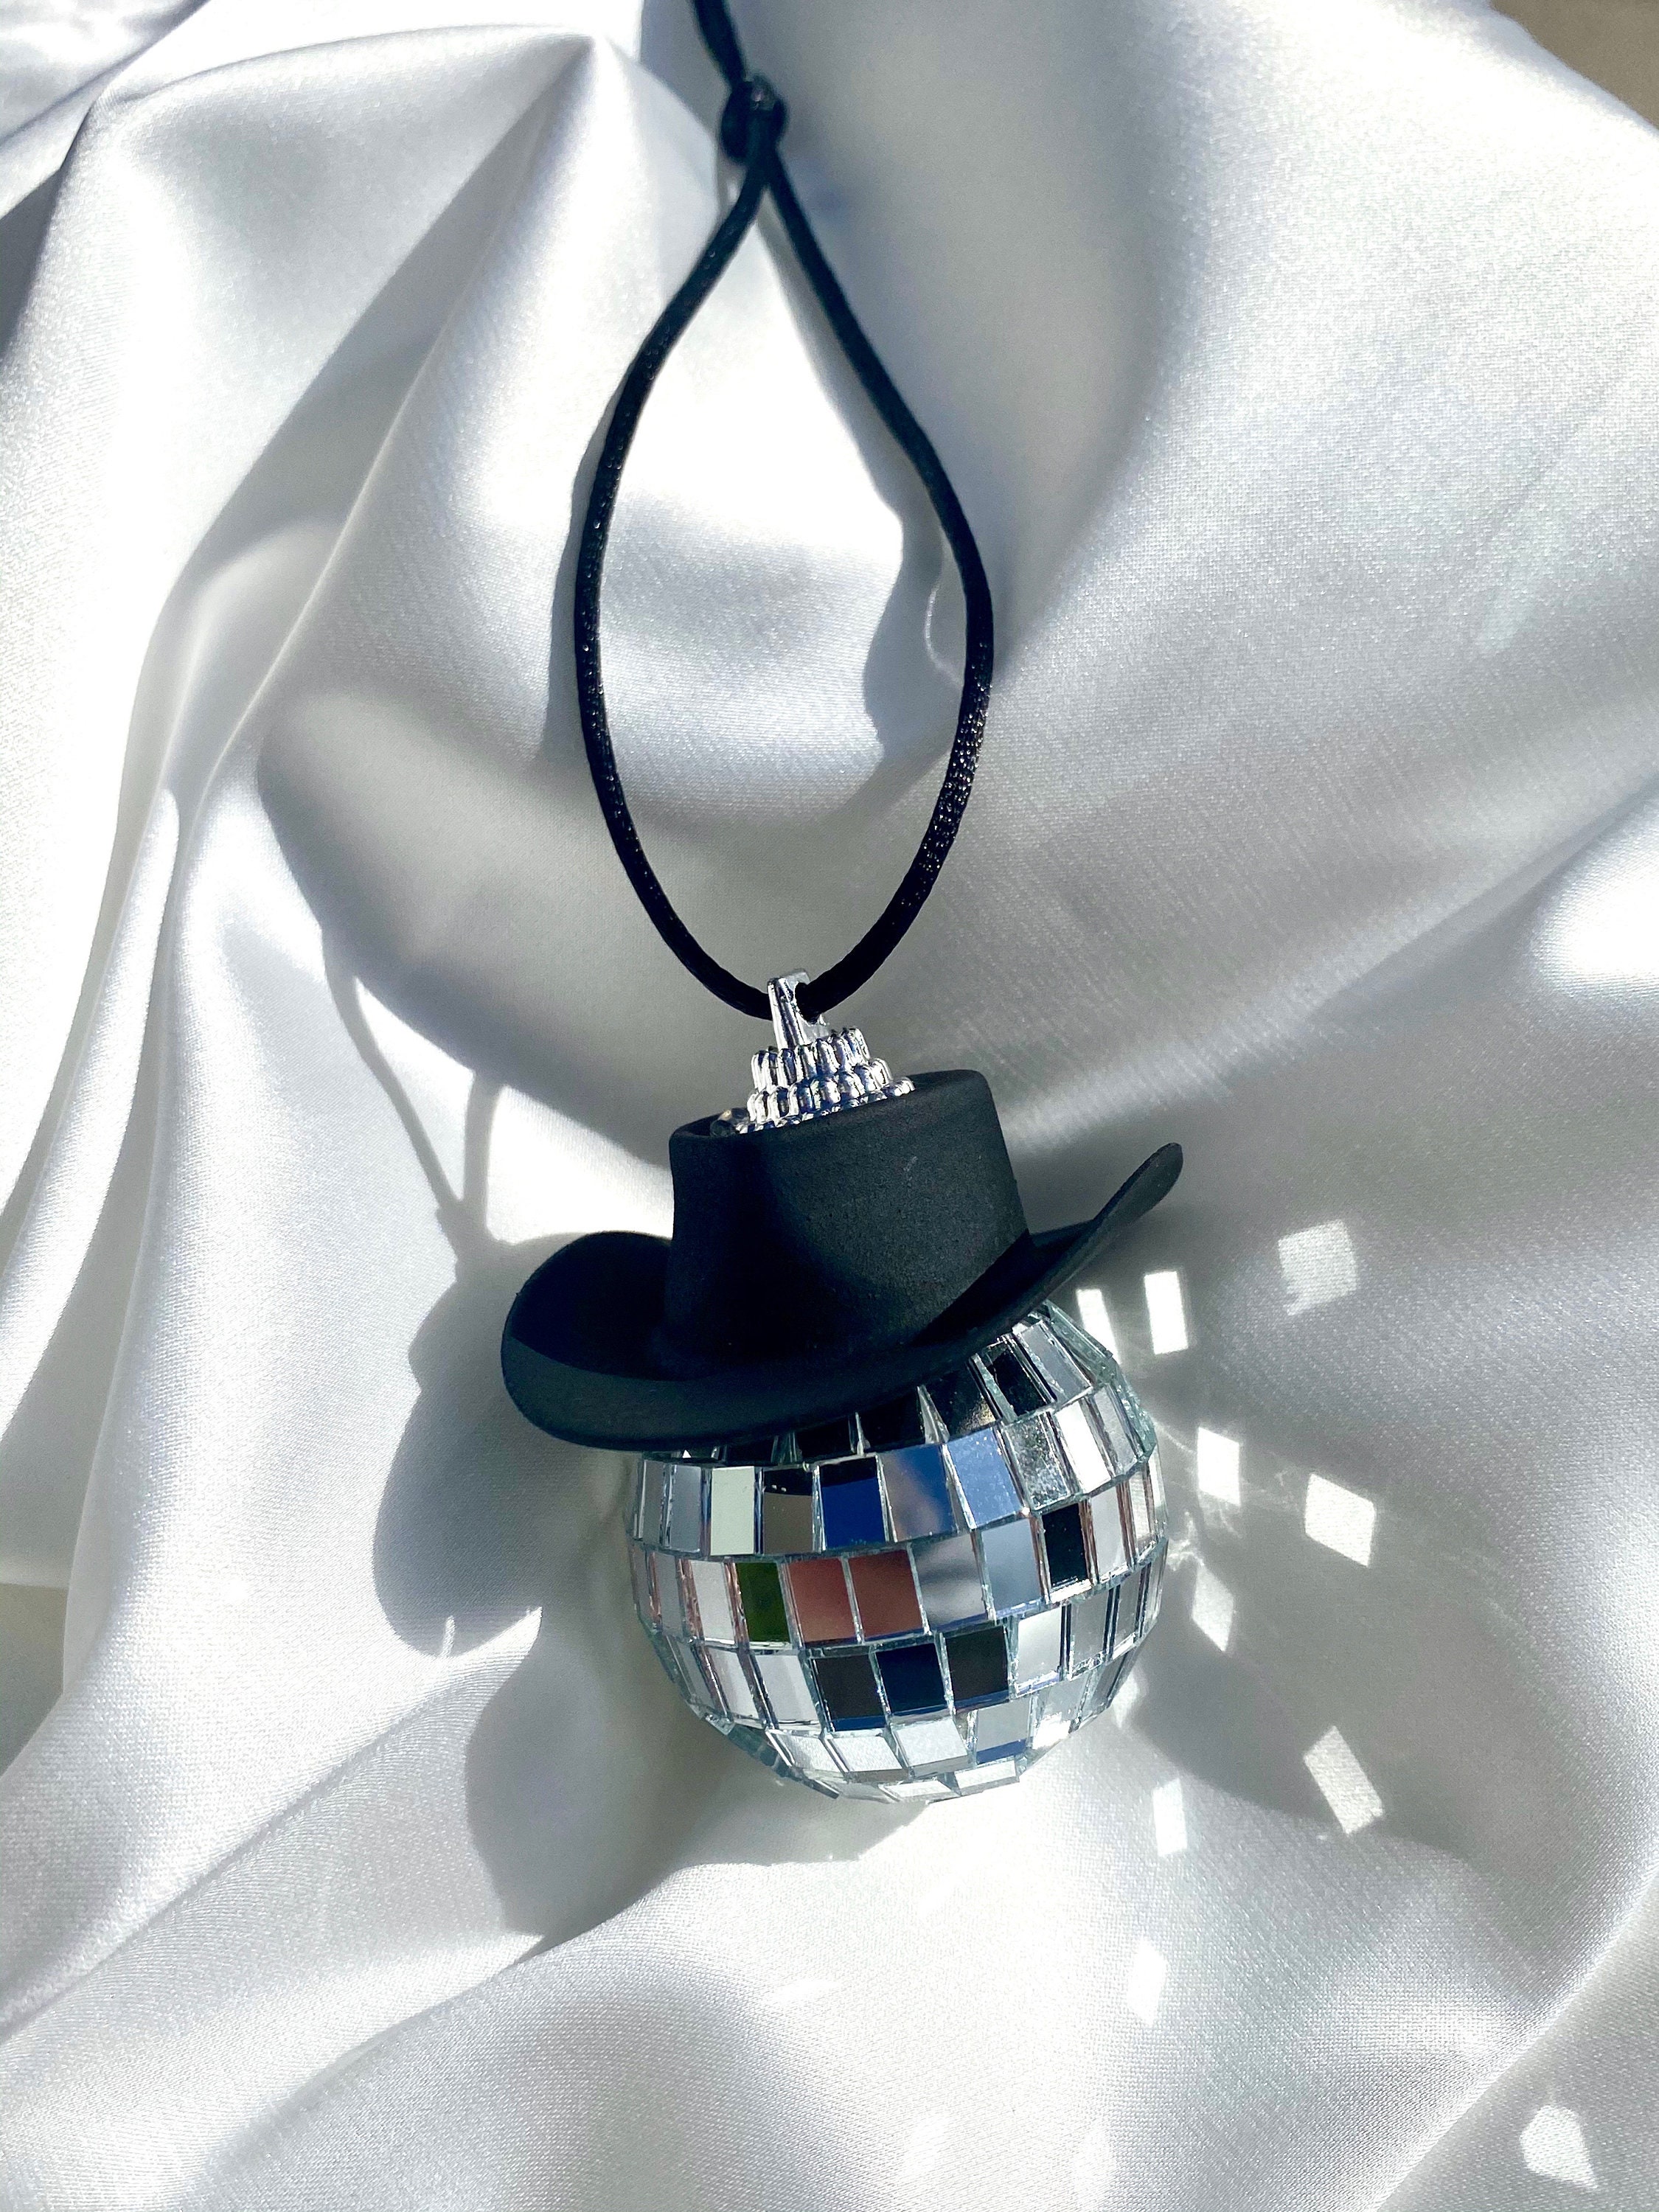 Buy Black Cowboy Hat Disco Ball Car Hanging Rear View Mirror Accessory L Disco  Ball and Black Cowboy Hat L Trendy Car Accessories L Car Decor Online in  India 